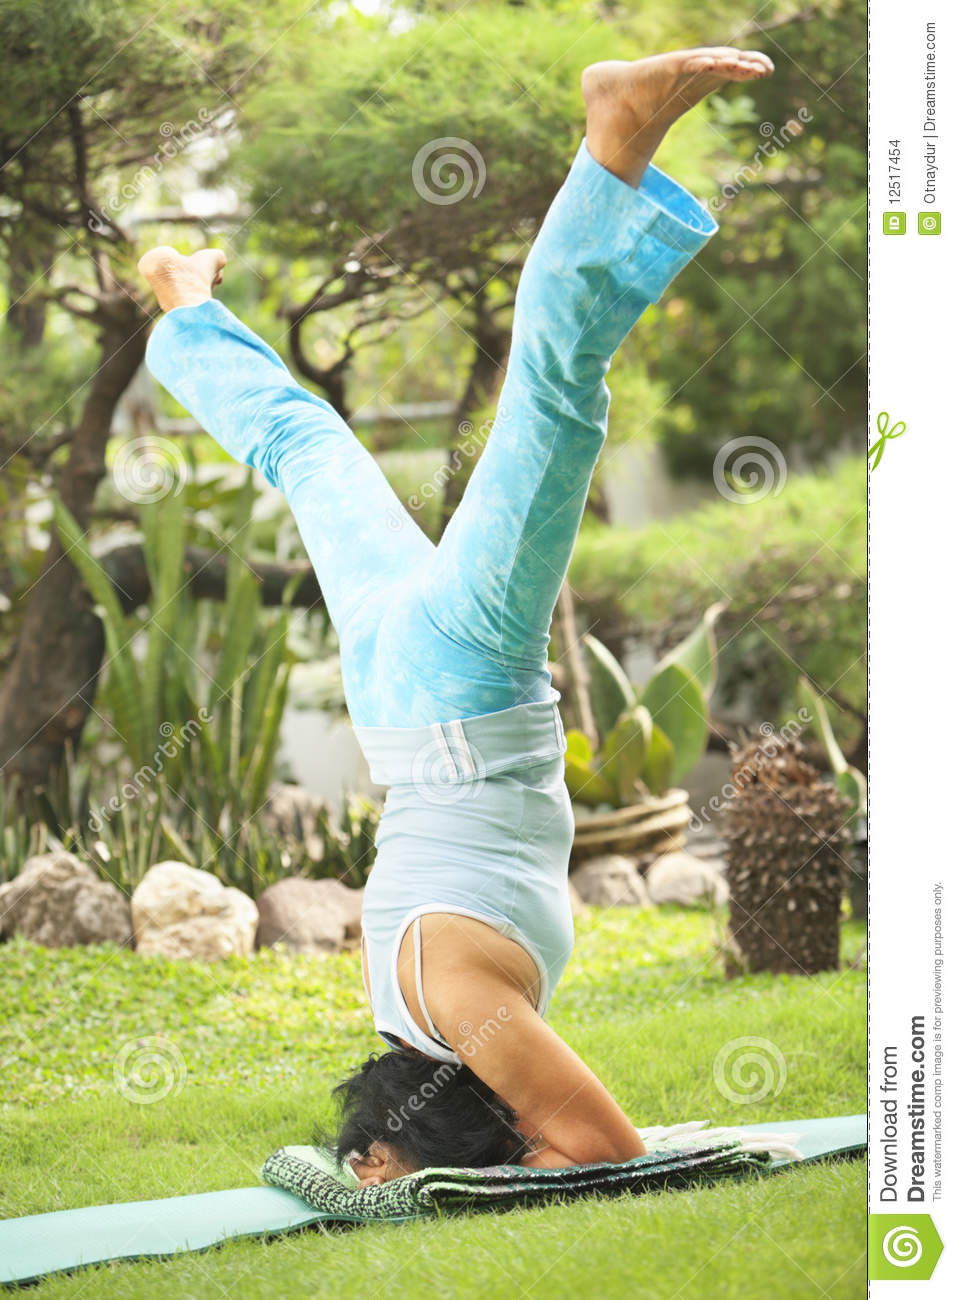 Senior Old Woman Doing Yoga In Park Stock Images   Image  12517454